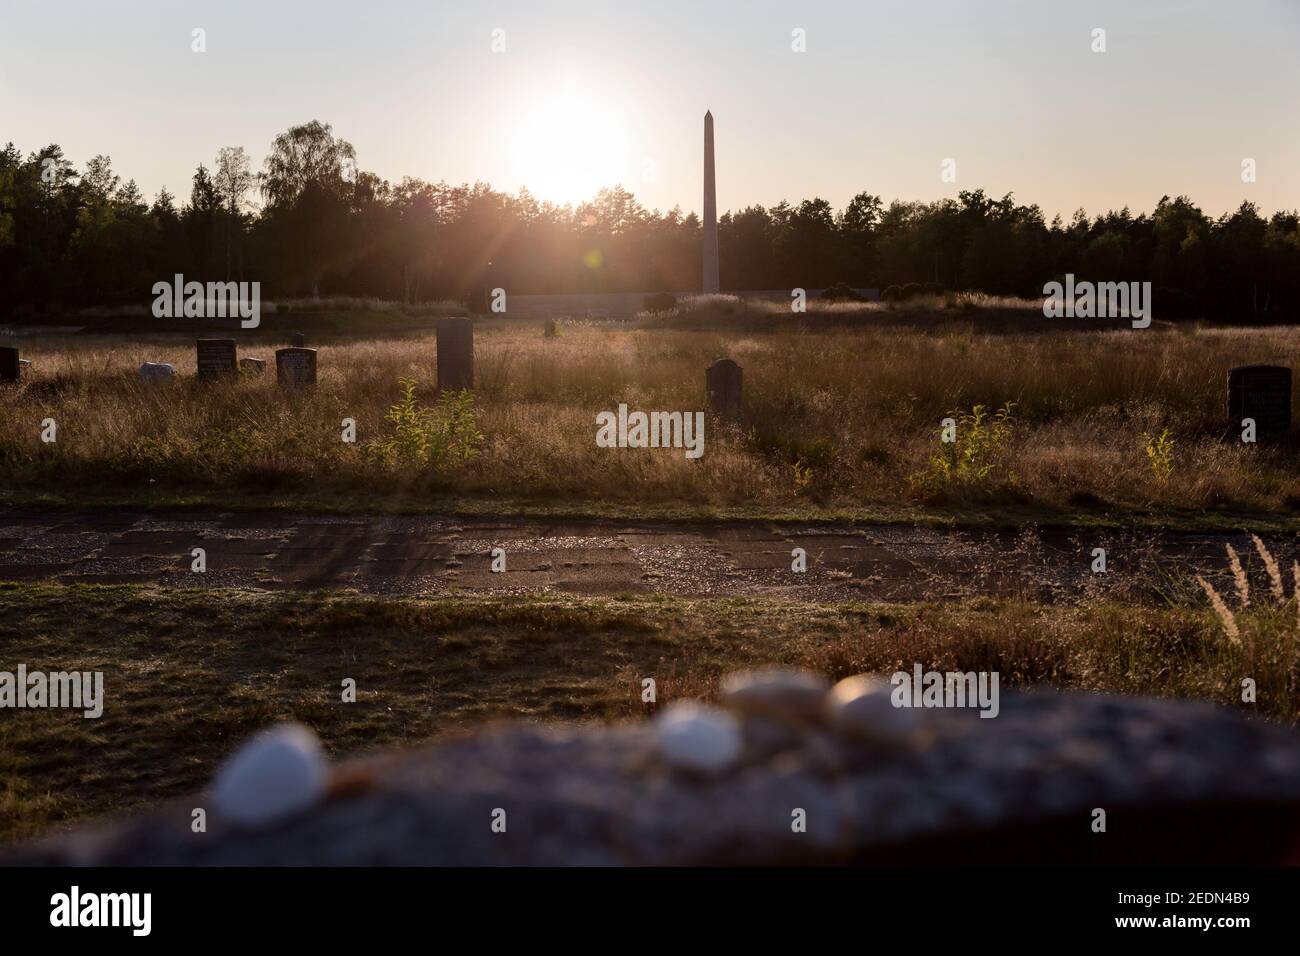 19.09.2020, Lohheide, Lower Saxony, Germany - Bergen-Belsen memorial, obelisk in the evening sun, in front of it mass graves with thousands of dead, a Stock Photo